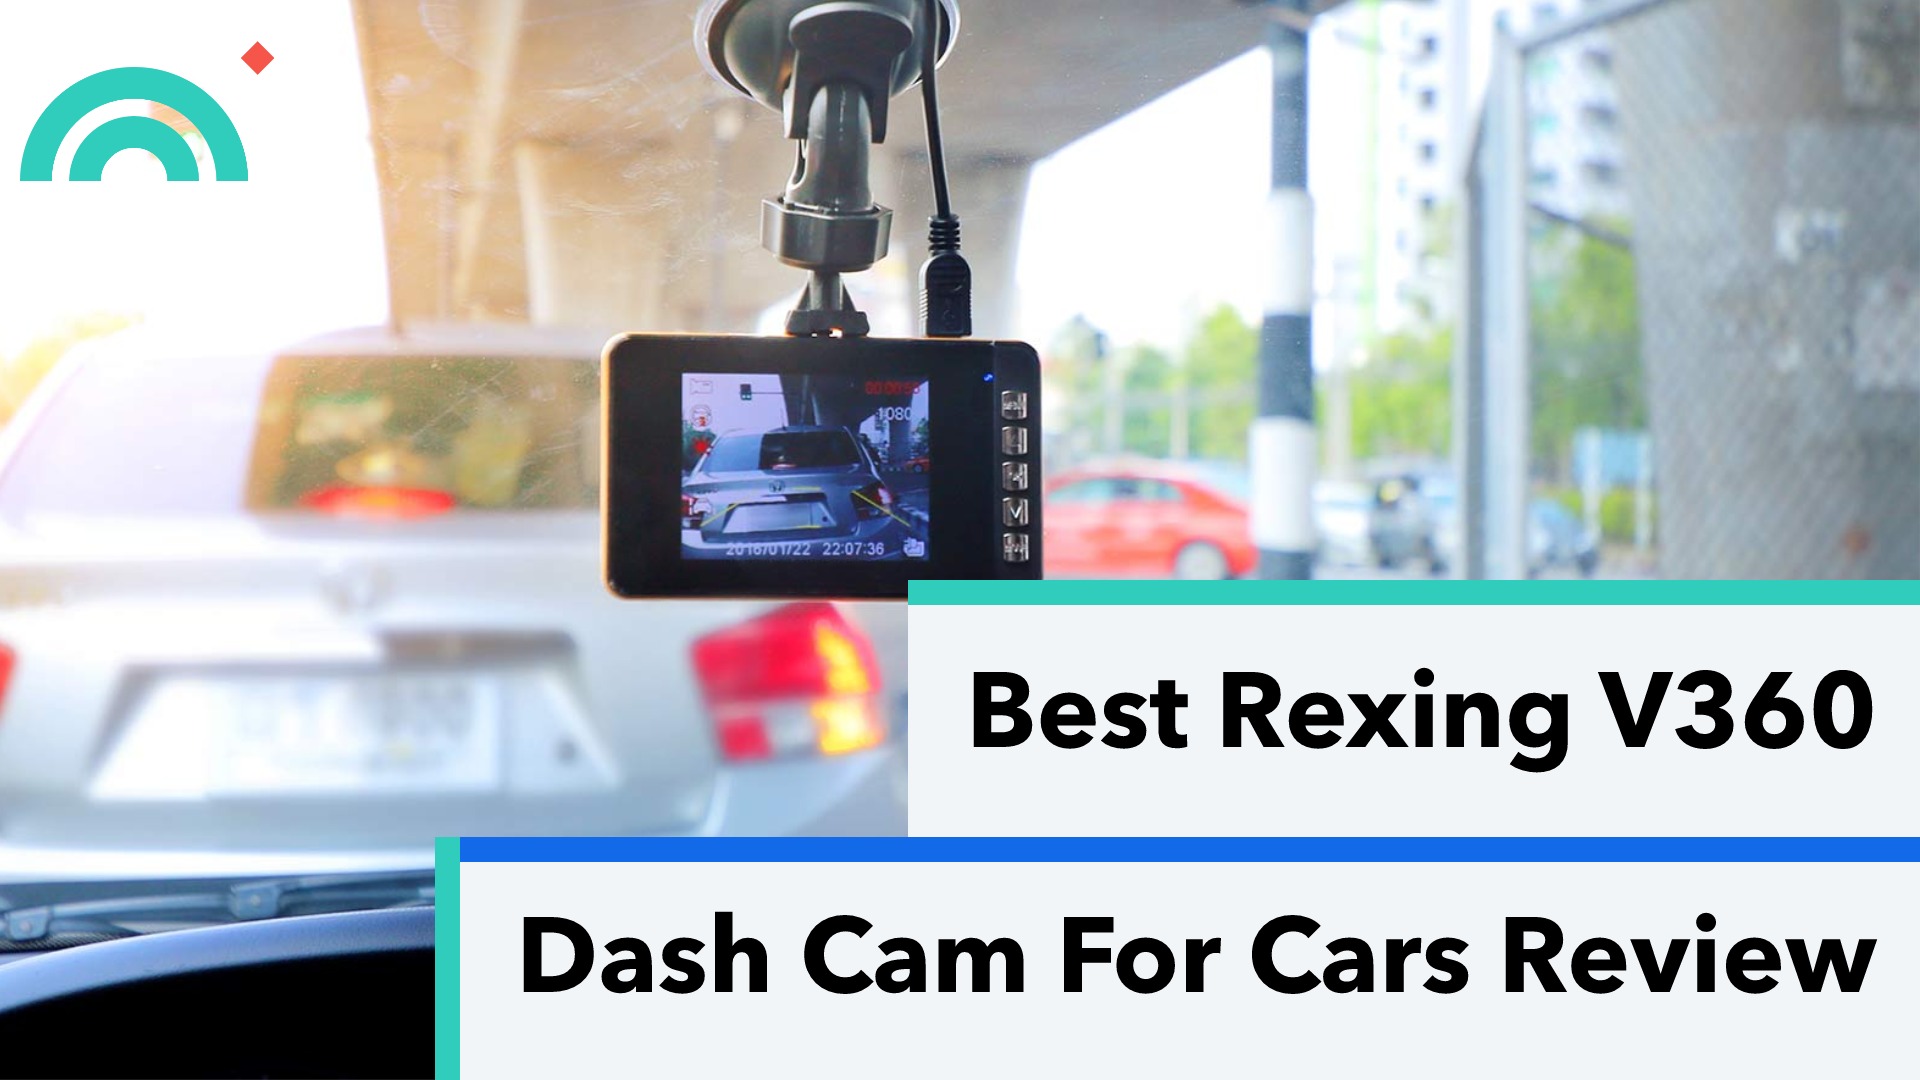 Best Rexing 360 Dash Cam For Cars